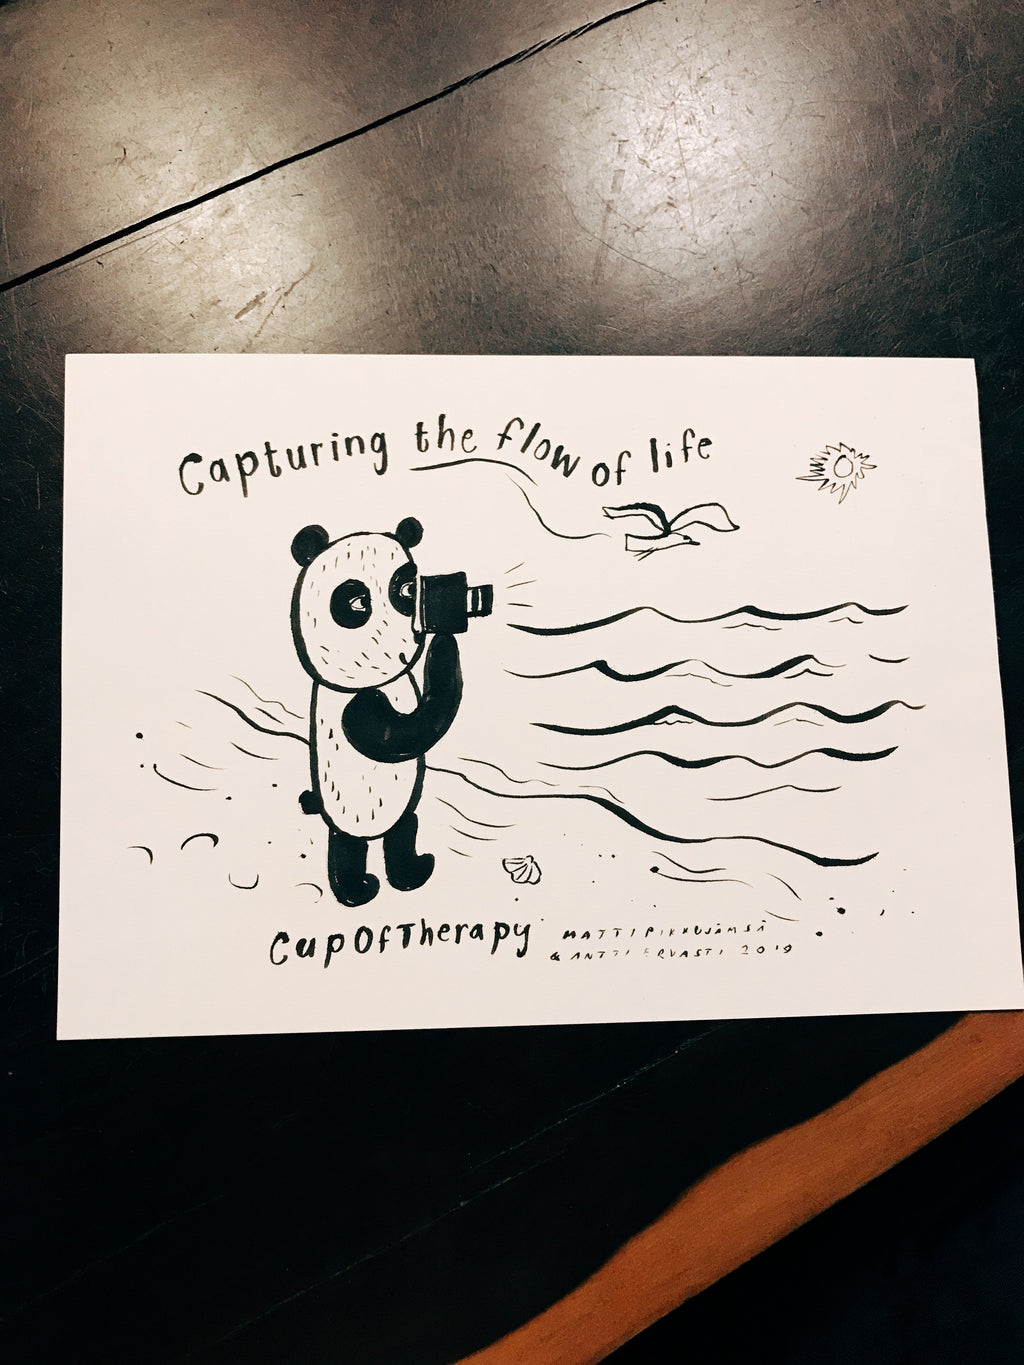 Personalized CupOfTherapy drawing